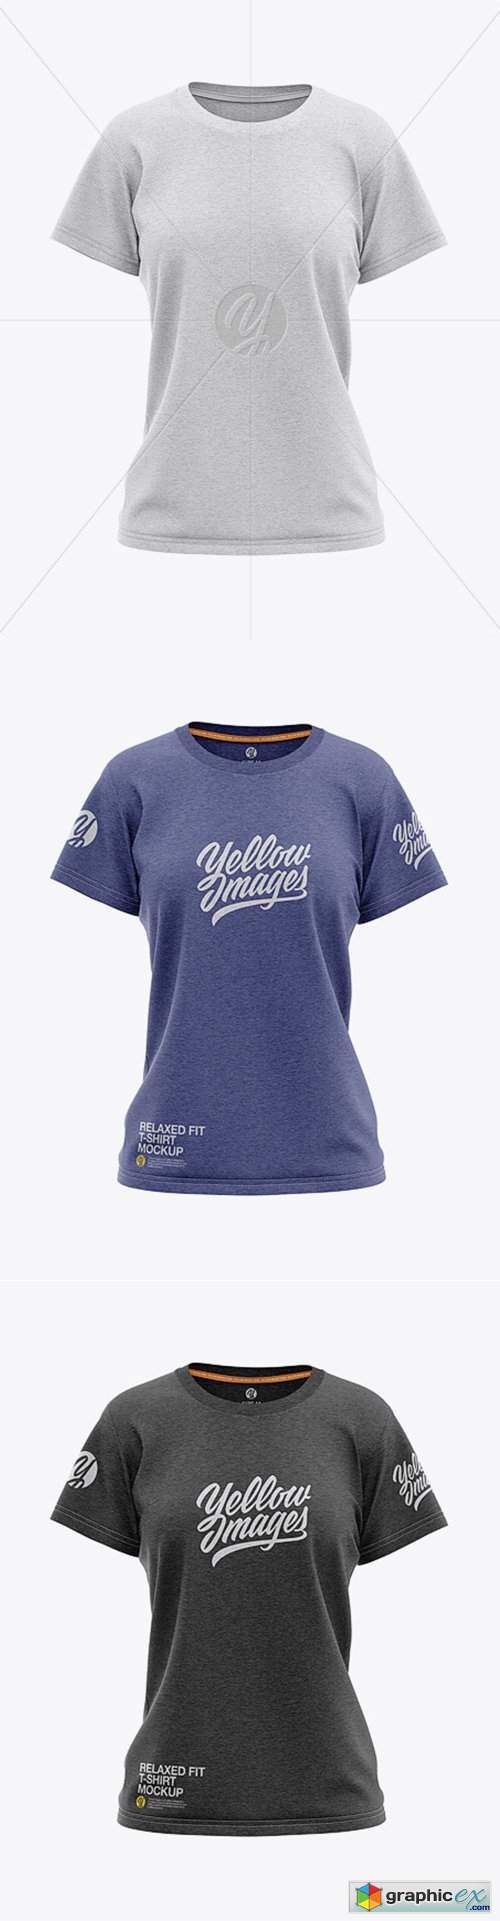 Women's Heather Relaxed Fit T-shirt Mockup - Front View